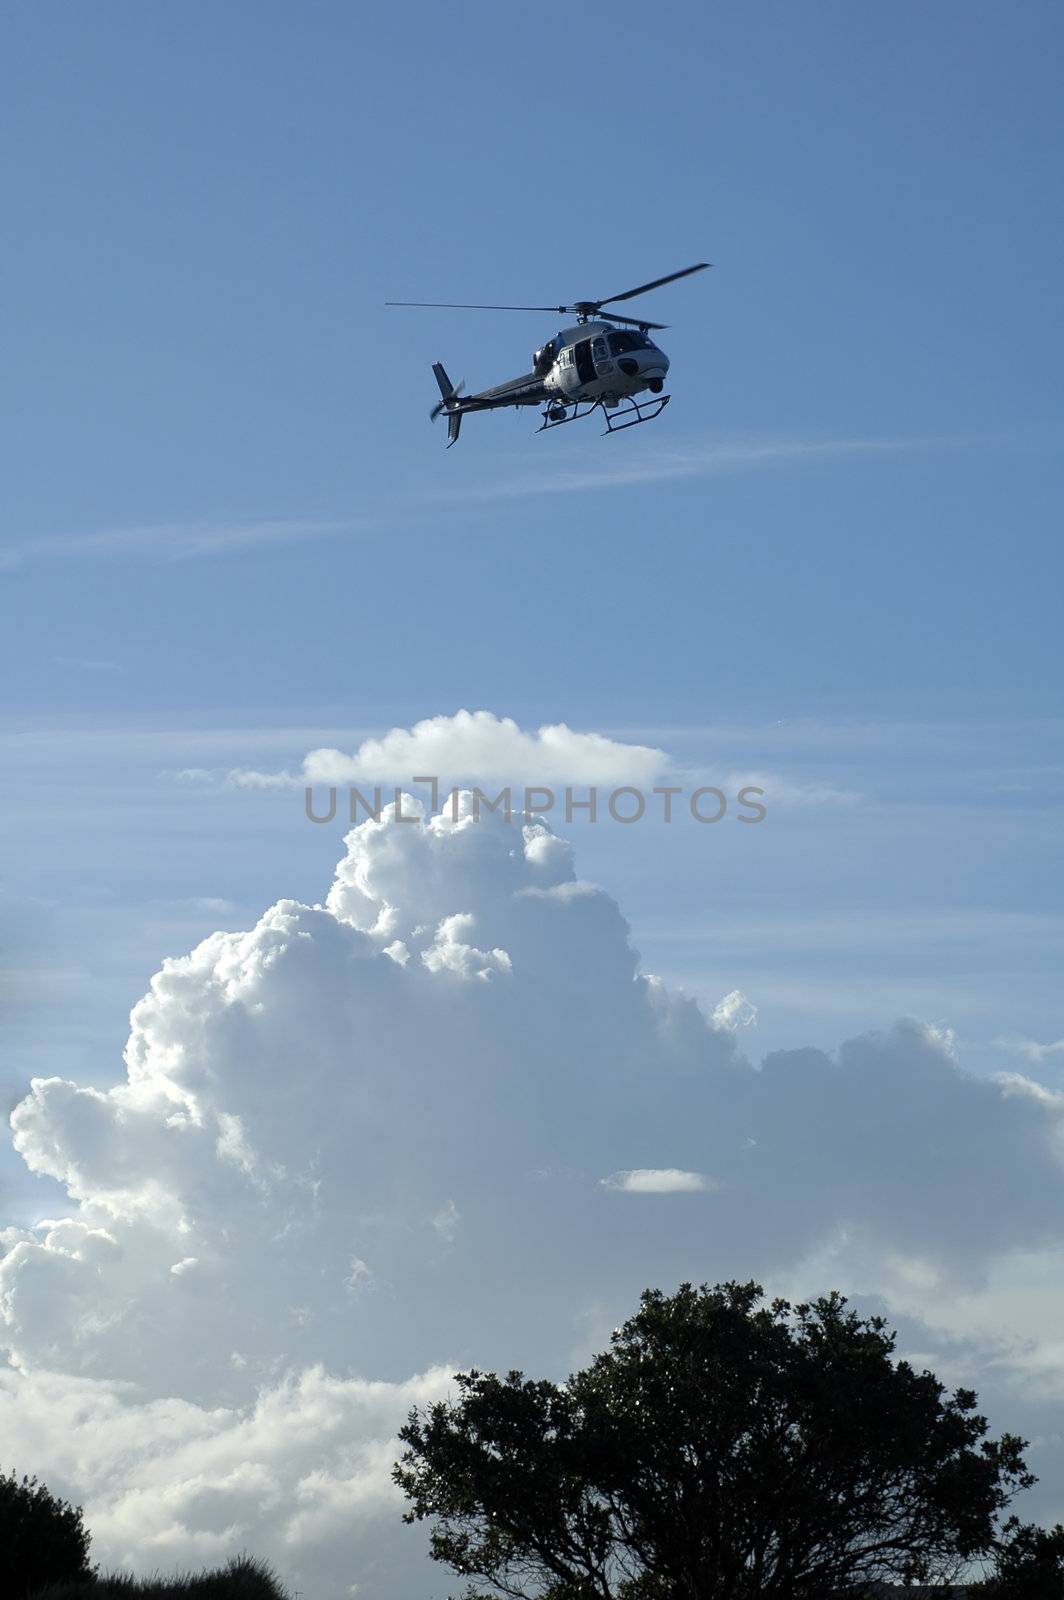 police helicopter above ground, clouds in background, photo taken in Sydney